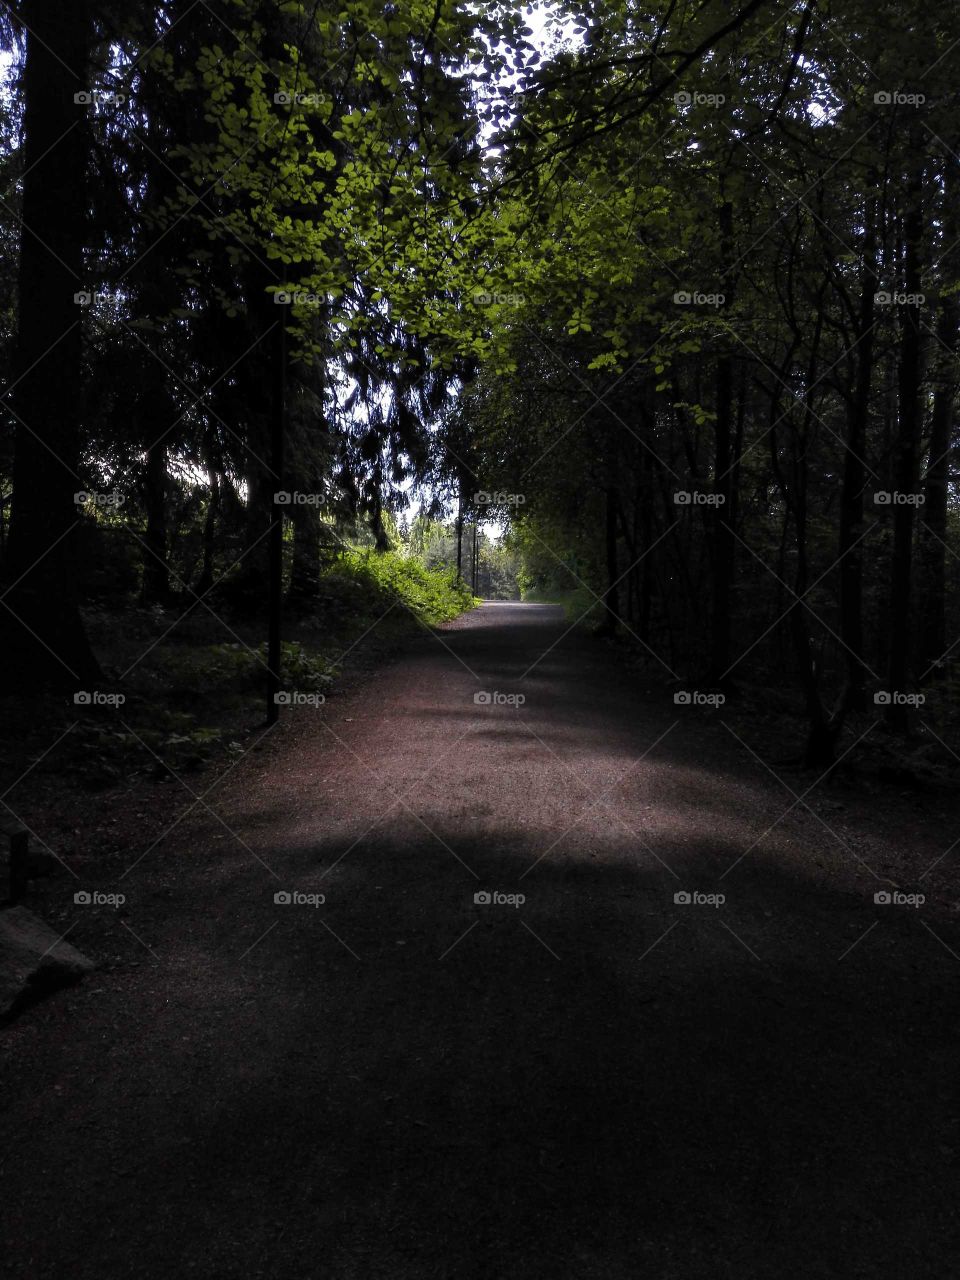 Ekebergparken, Oslo. Shot on a smartphone. 
Even though the path may be dark and scary, there's always light somewhere.